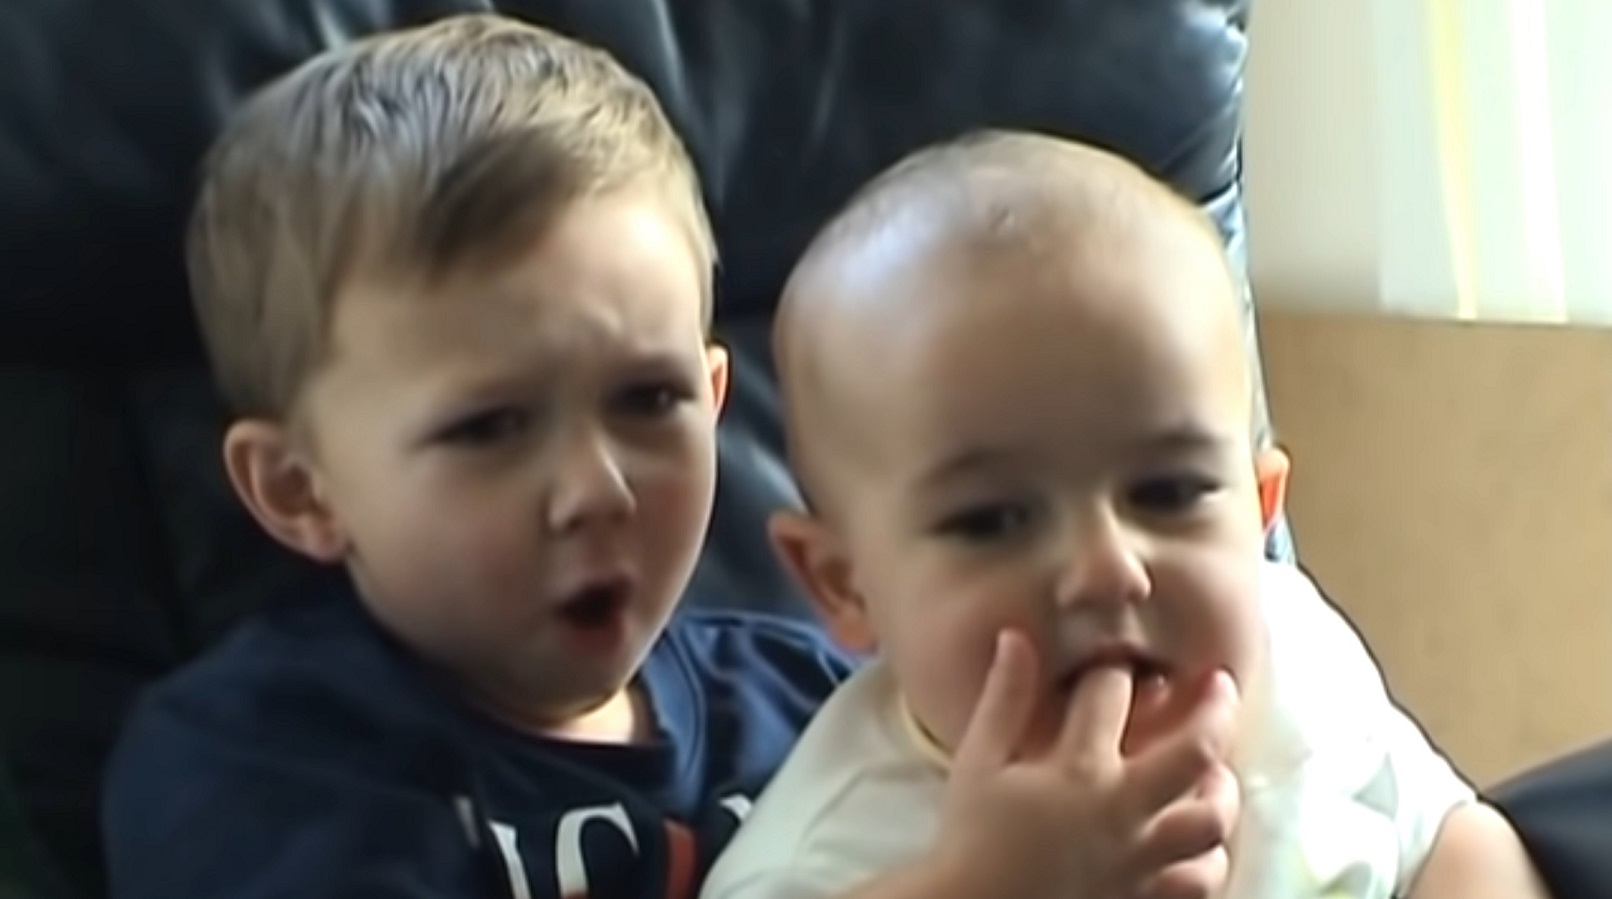 The latest silly NFT is the 'Charlie bit my finger' video